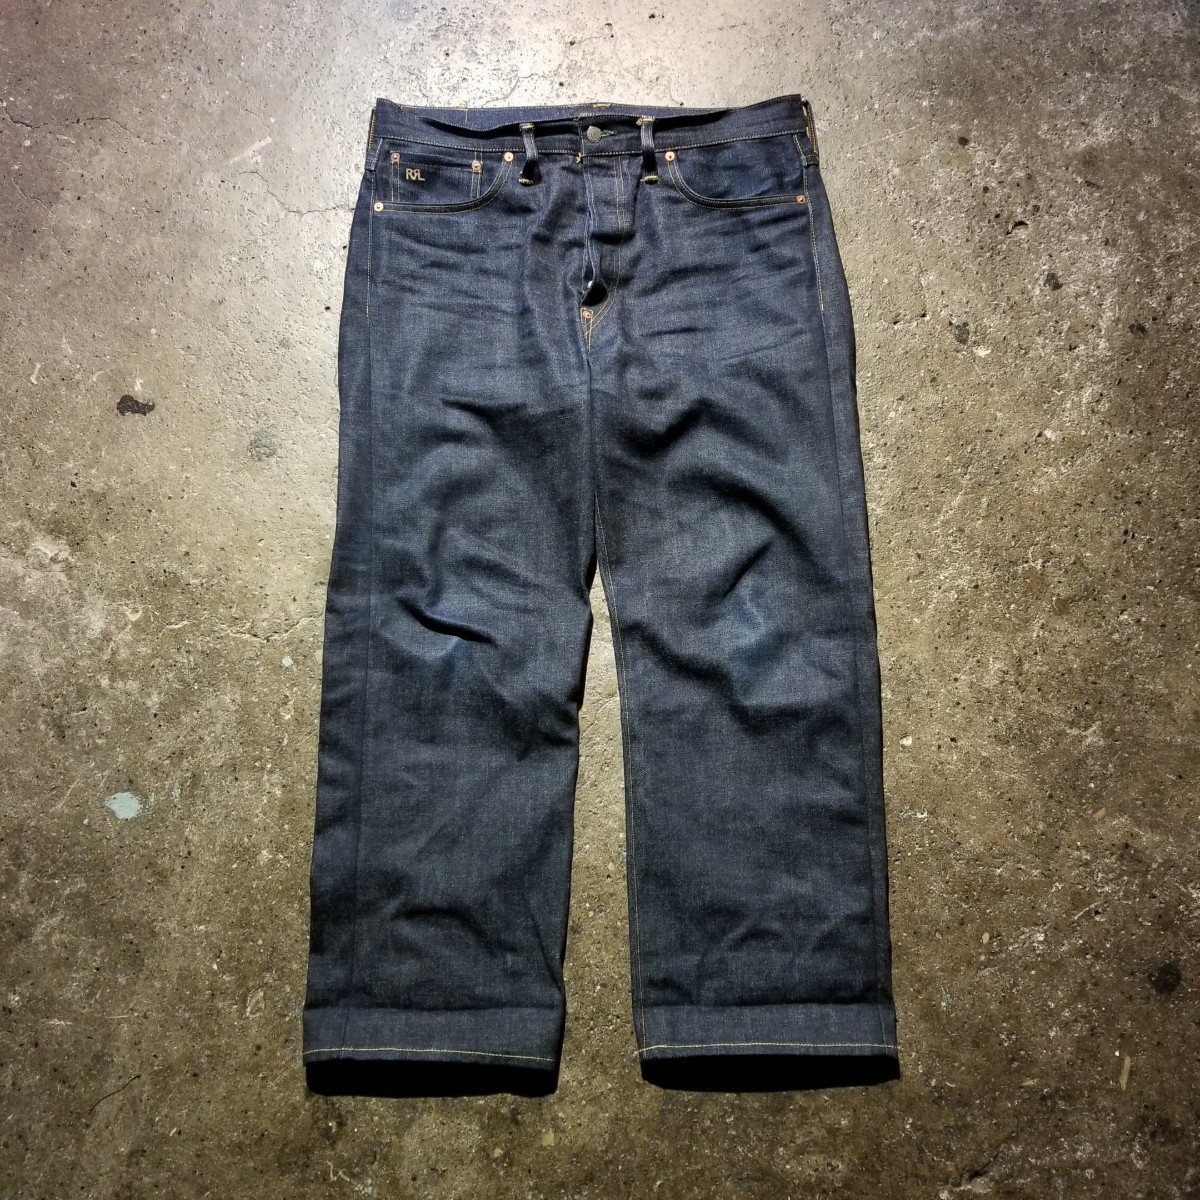 RRL VINTAGE 5 POCKET 1936 Buckle back Jeans 伊勢丹新宿限定 LIMITED PRODUCTION RUN ダブルアールエル 5ポケットデニム 34×32_画像1